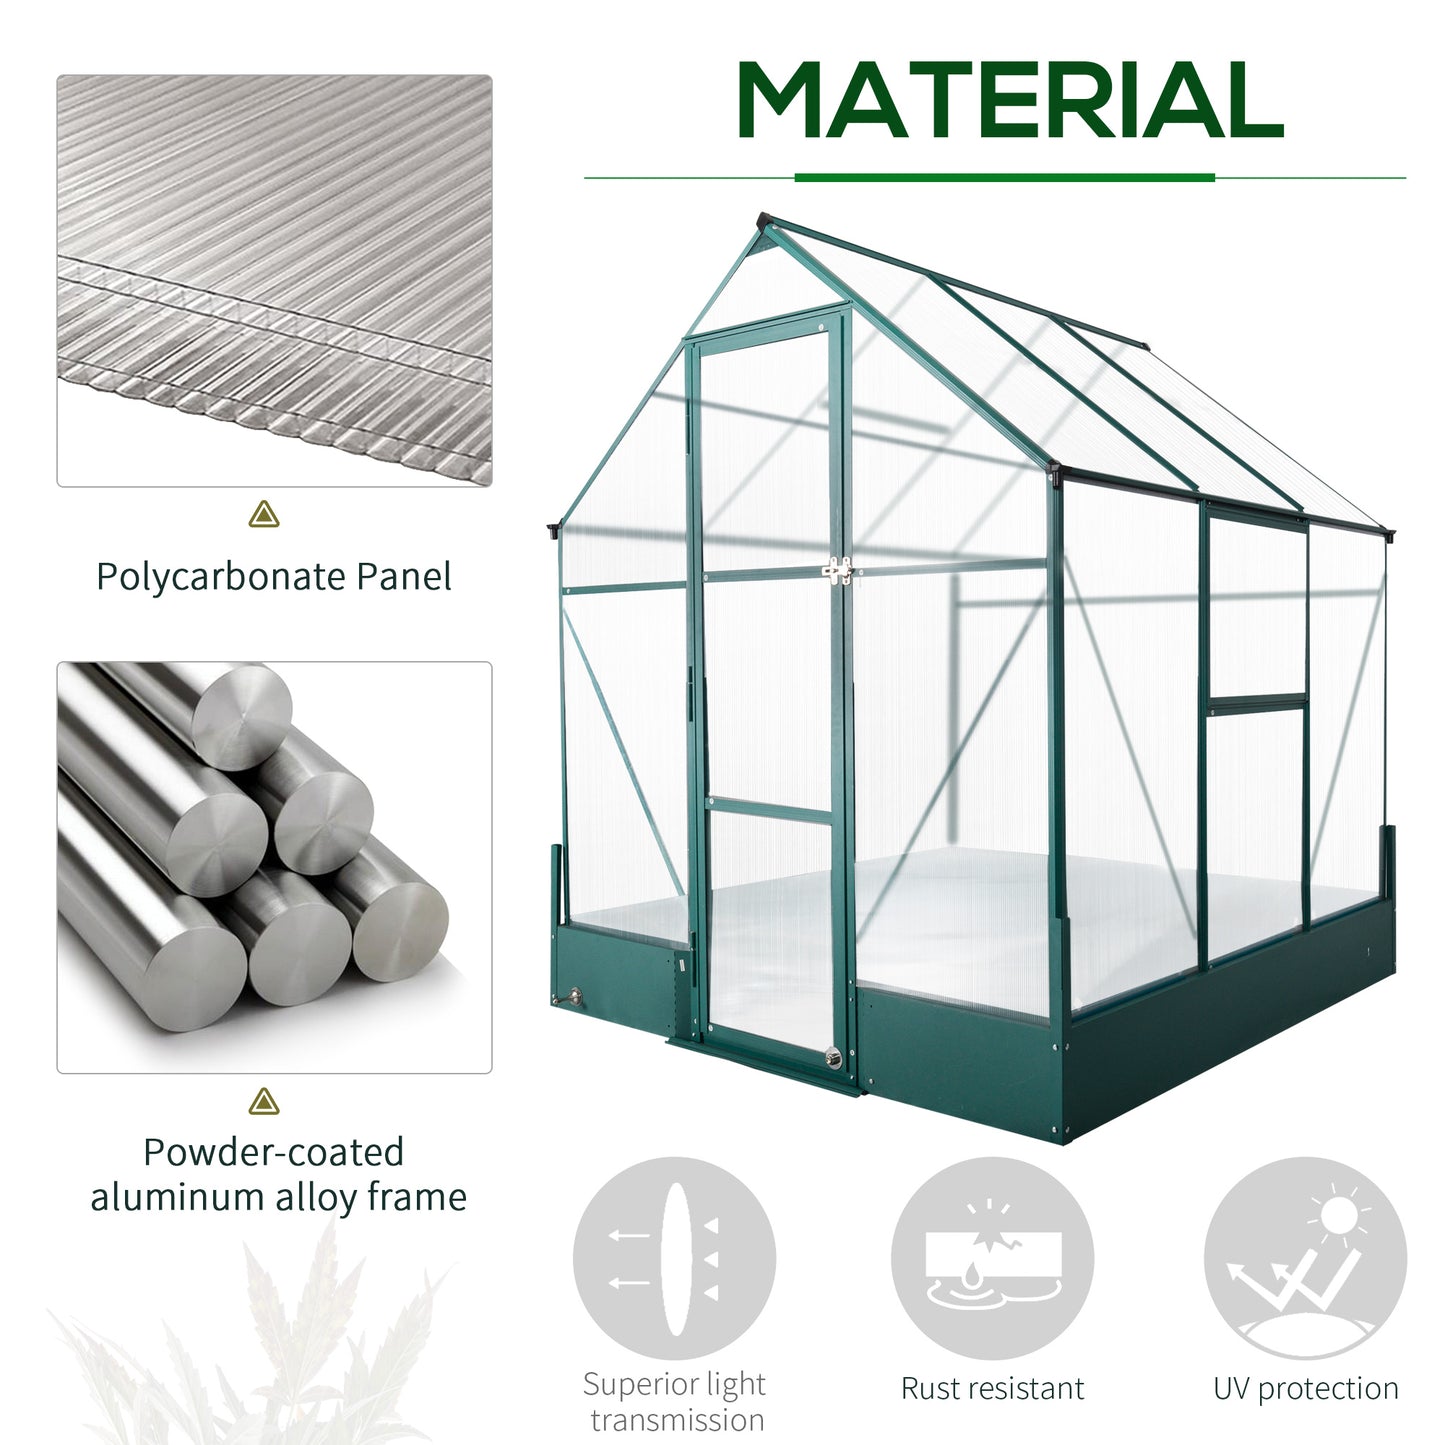 Outsunny Garden Walk-in Aluminium Greenhouse Polycarbonate with Plant Bed ,Temperature Controlled Window, Foundation, 6 x 6ft